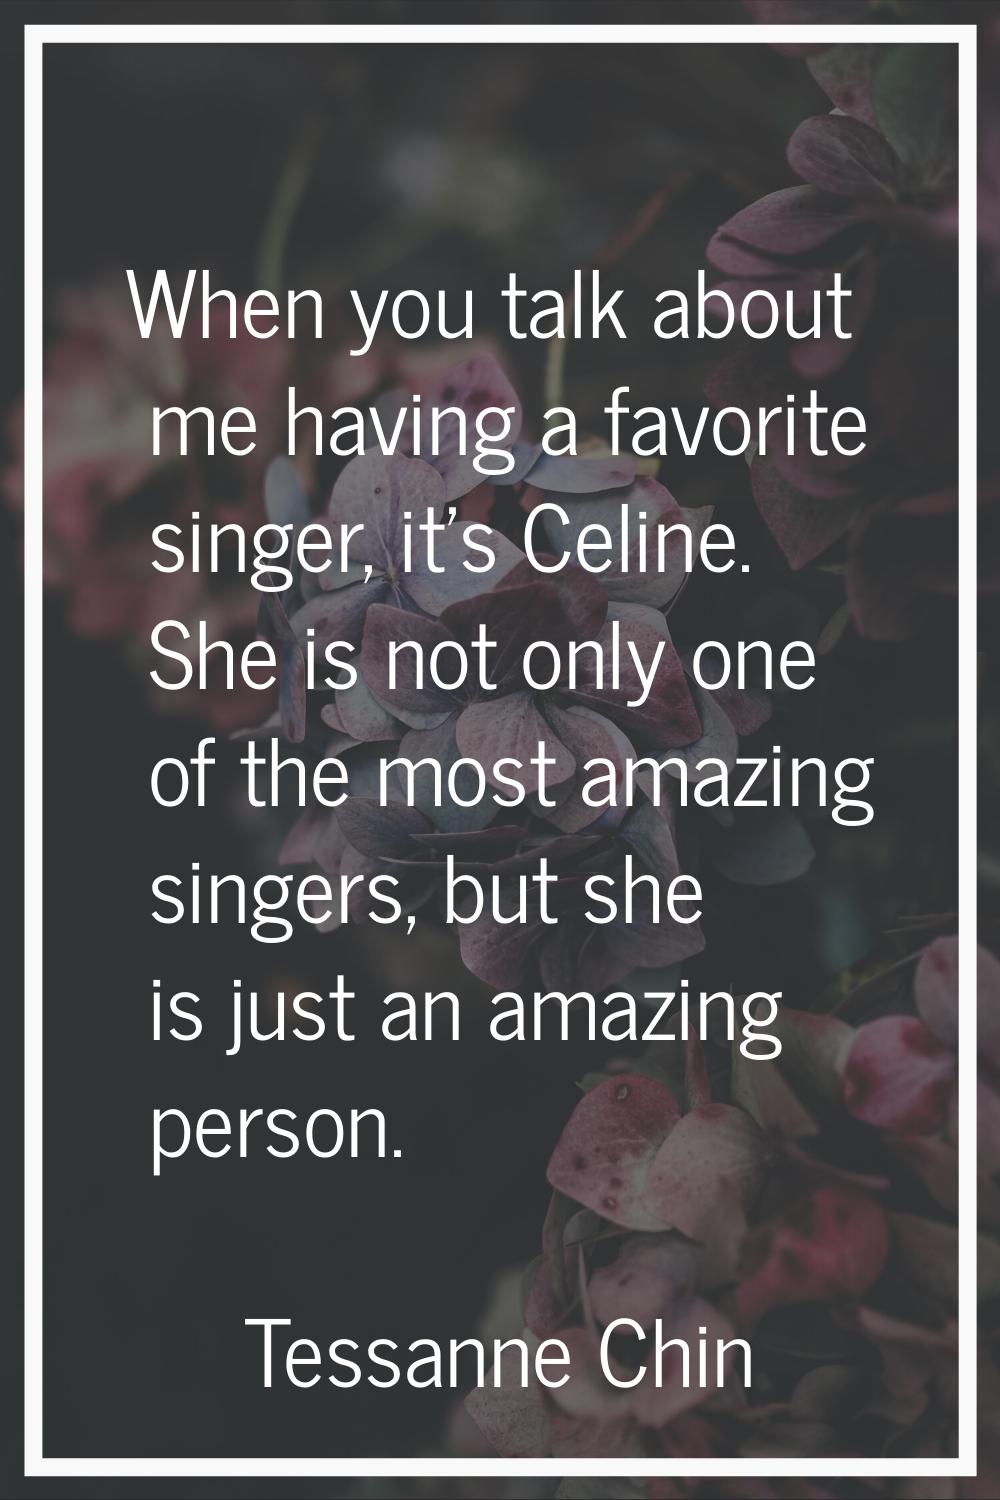 When you talk about me having a favorite singer, it's Celine. She is not only one of the most amazi